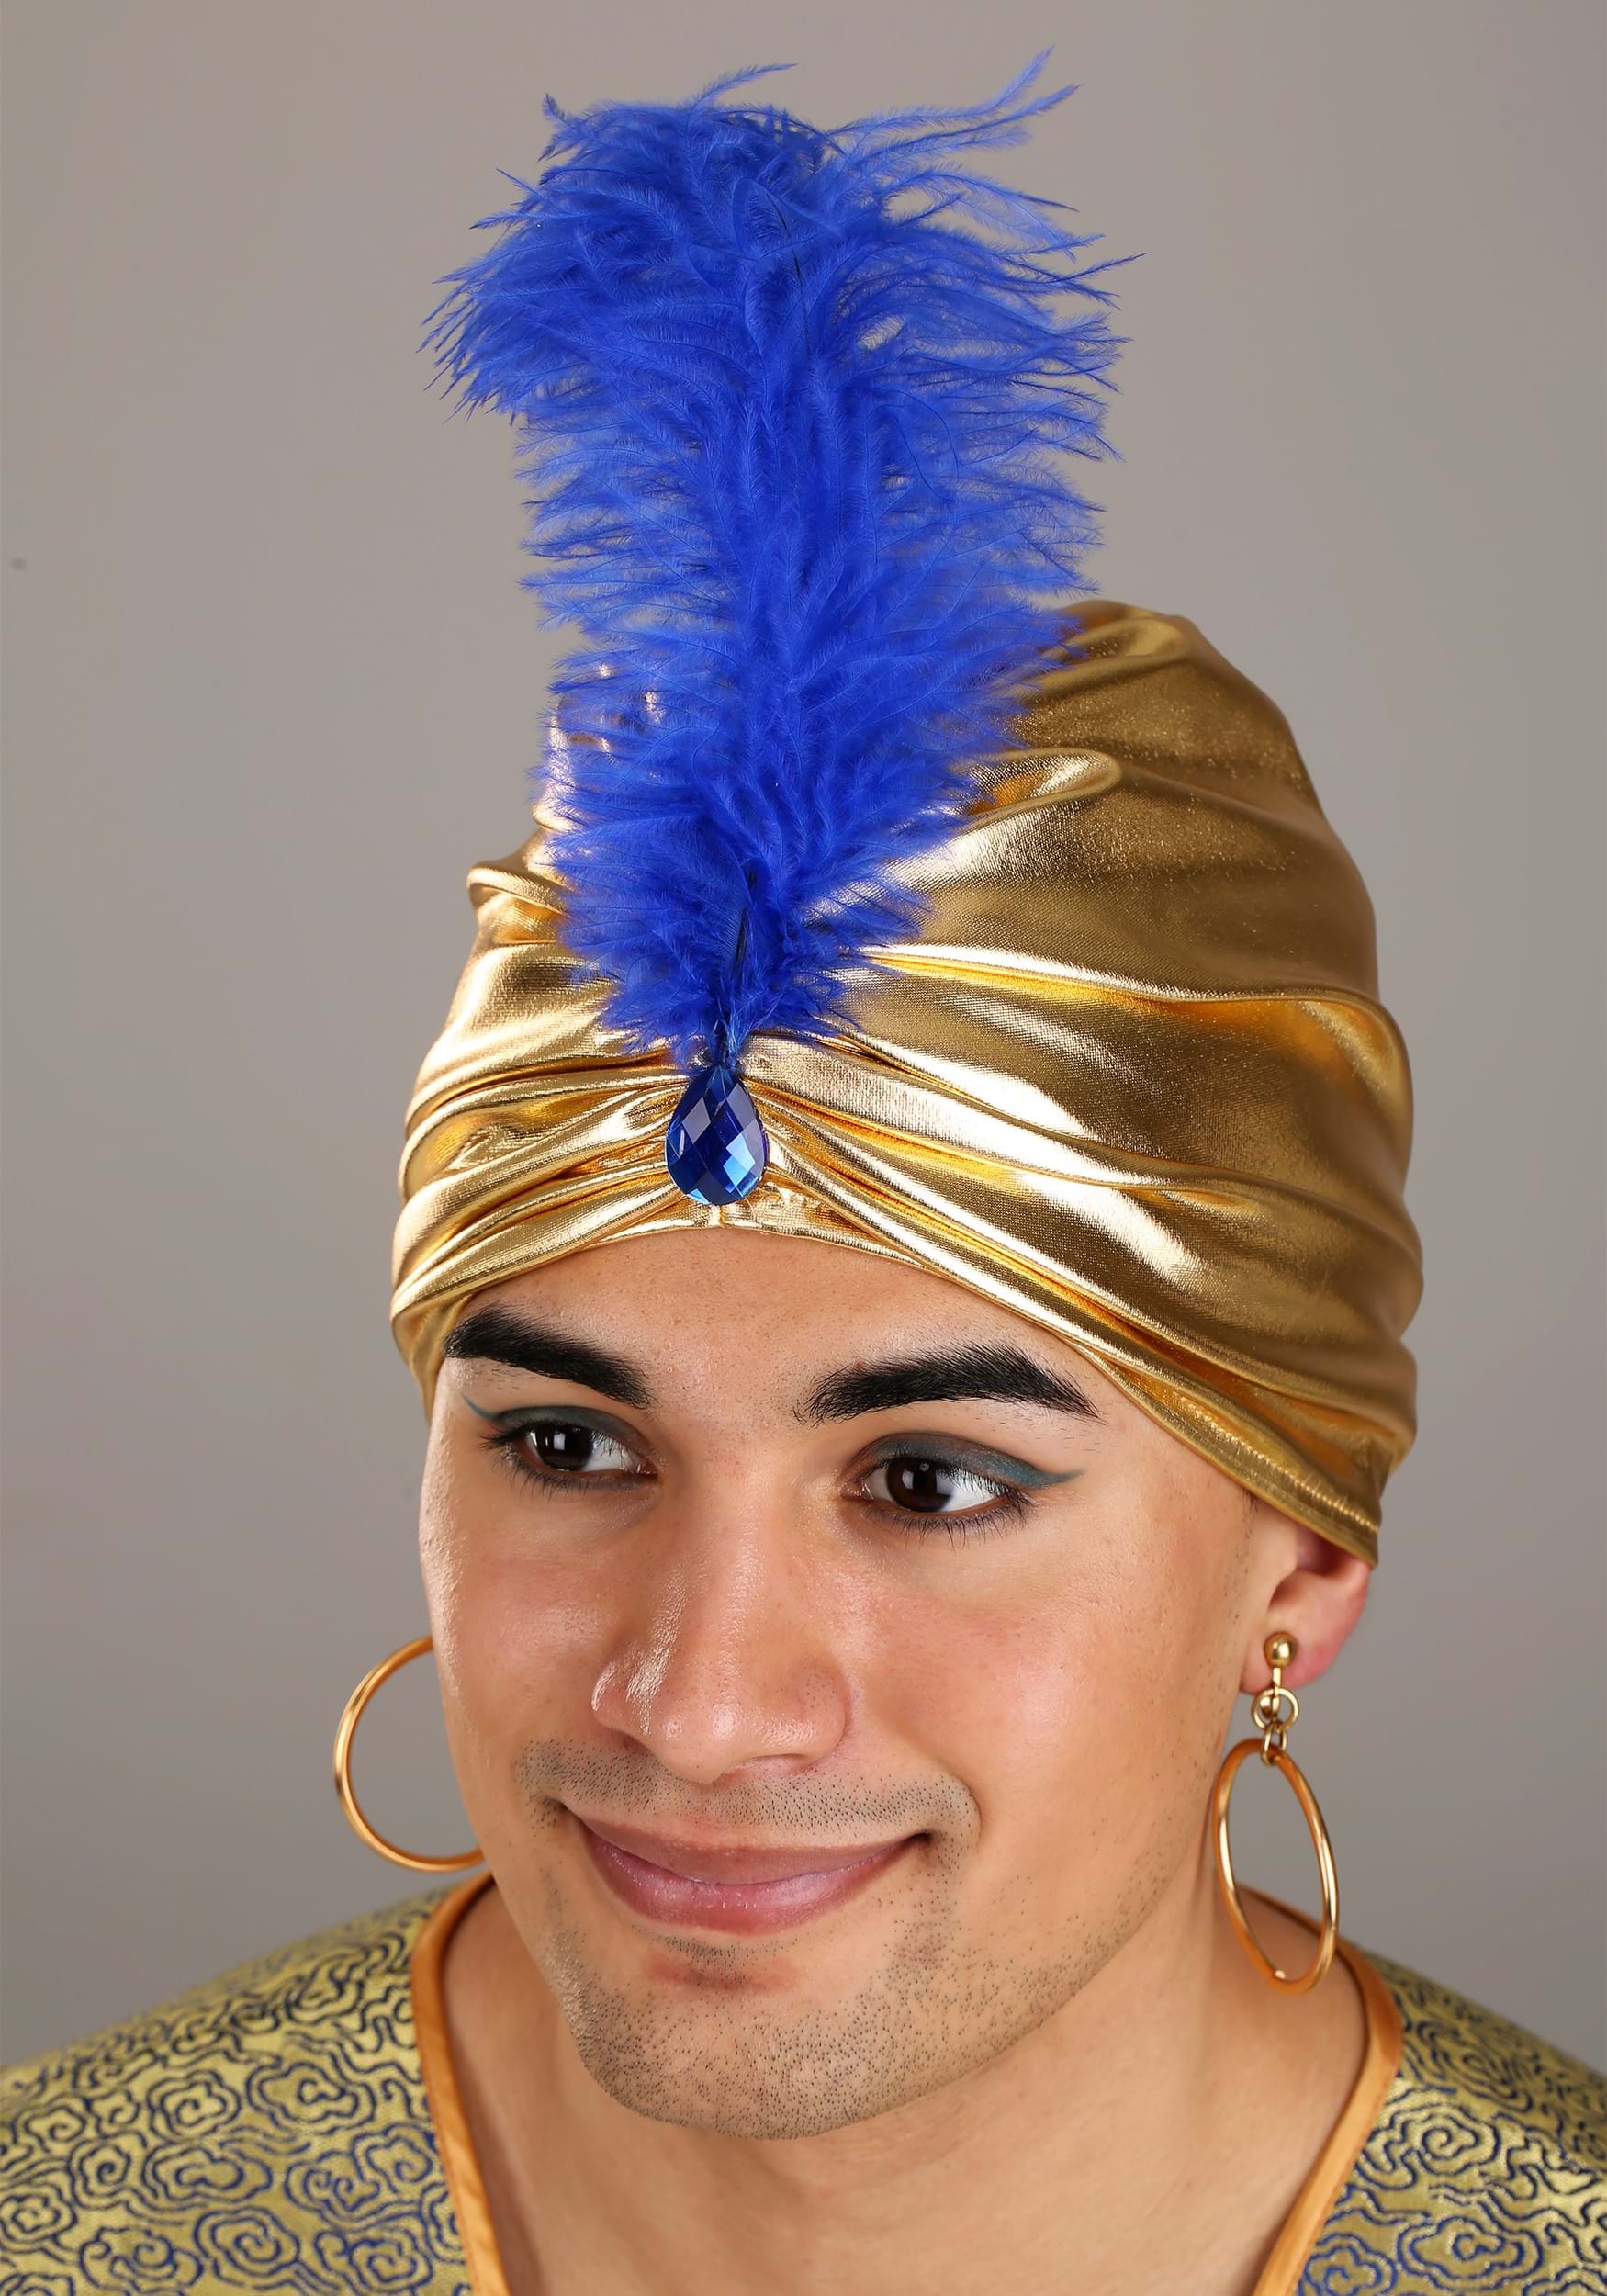 Magical Genie Costume for Adults